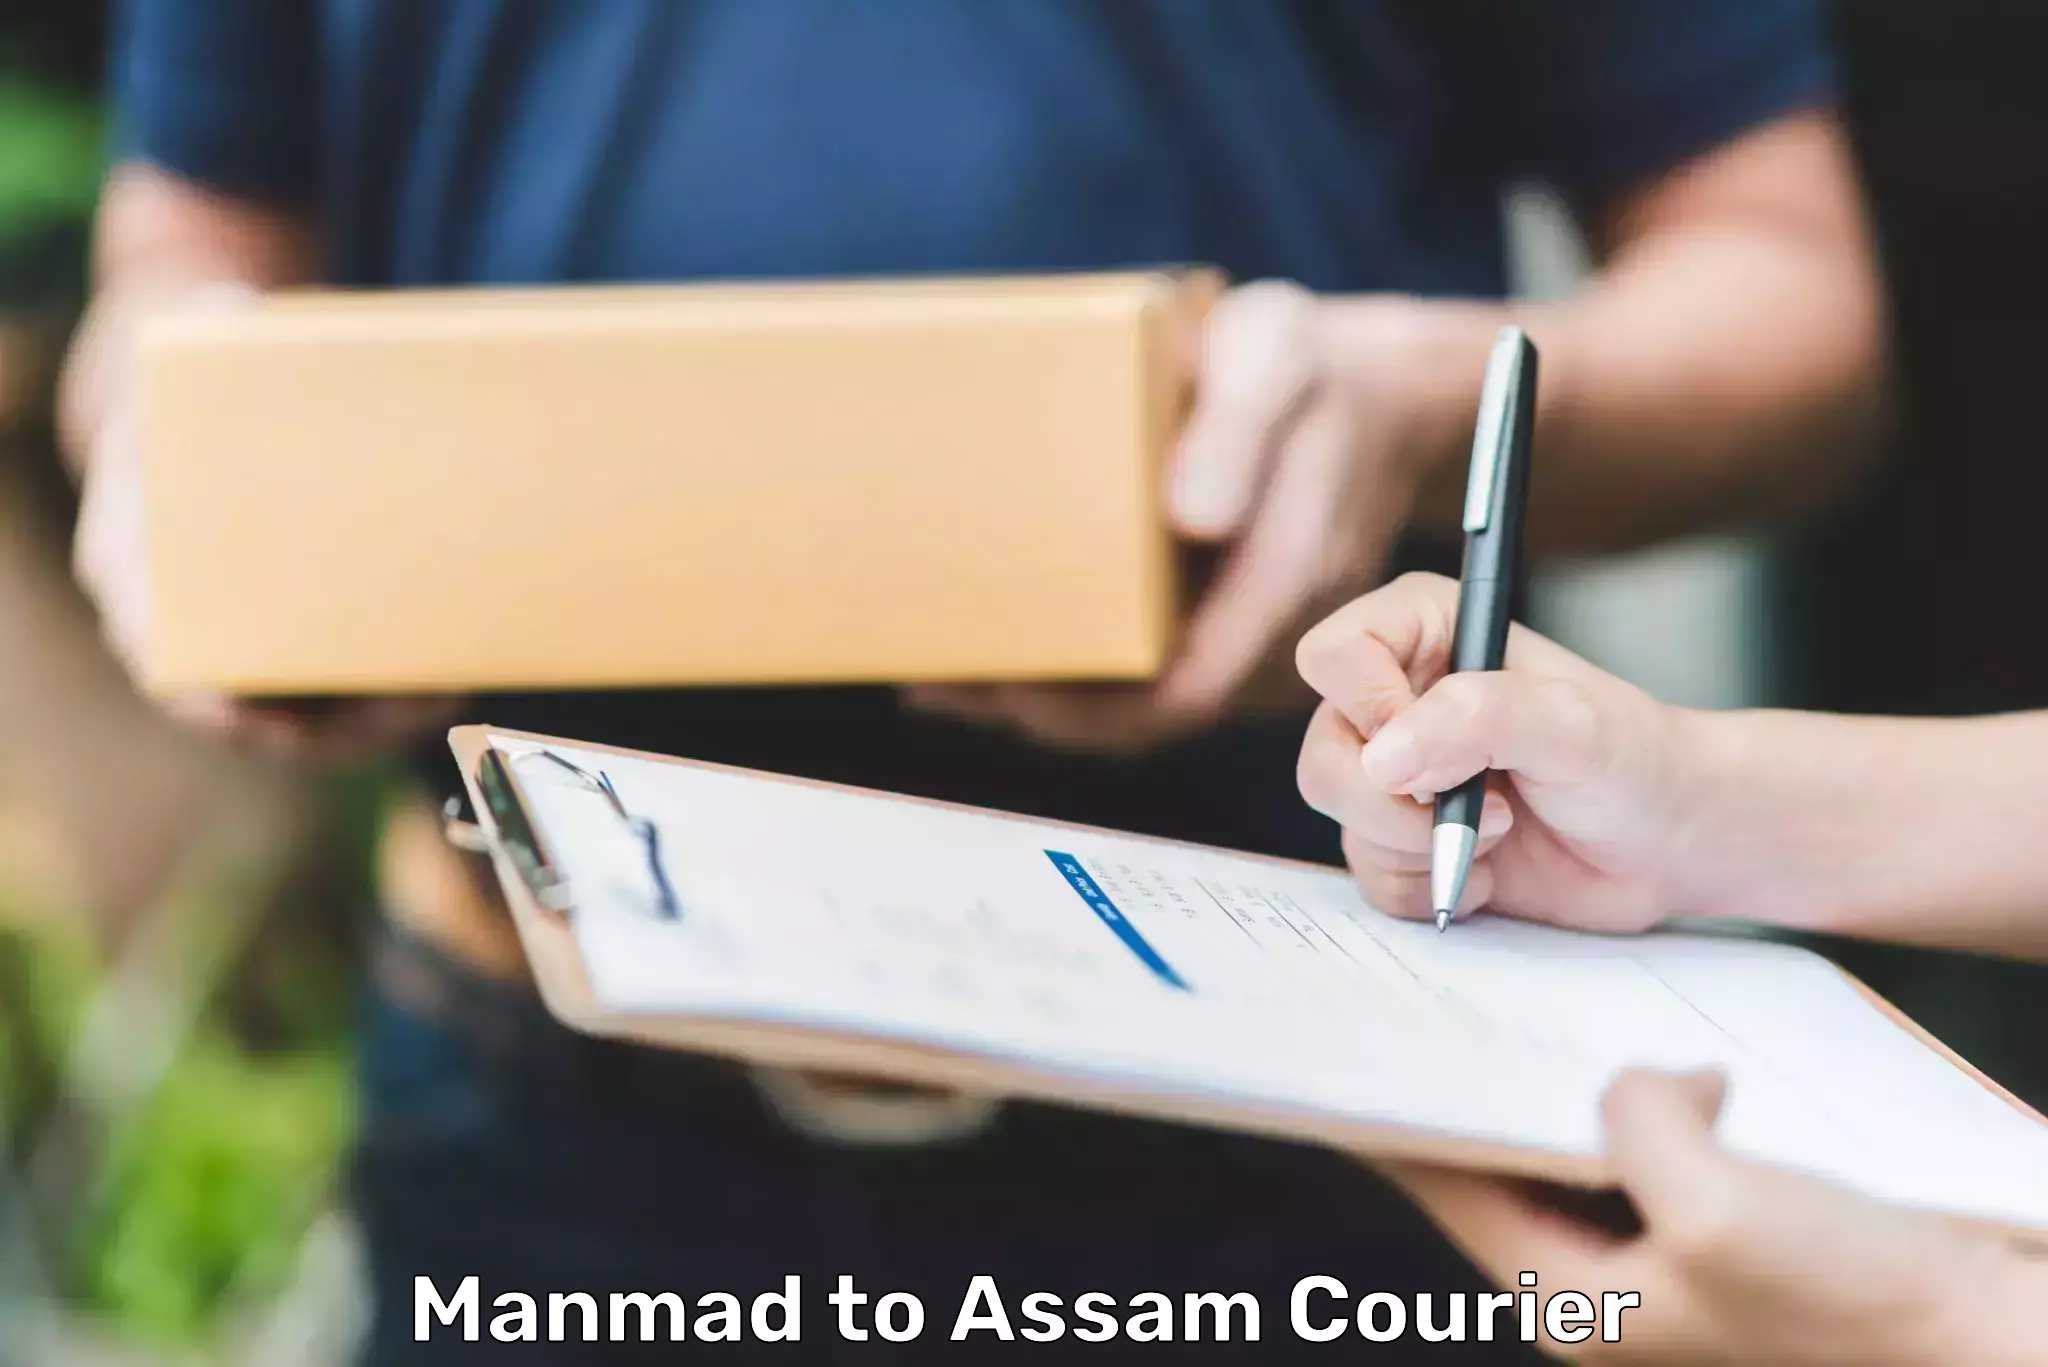 Multi-package shipping Manmad to Tezpur University